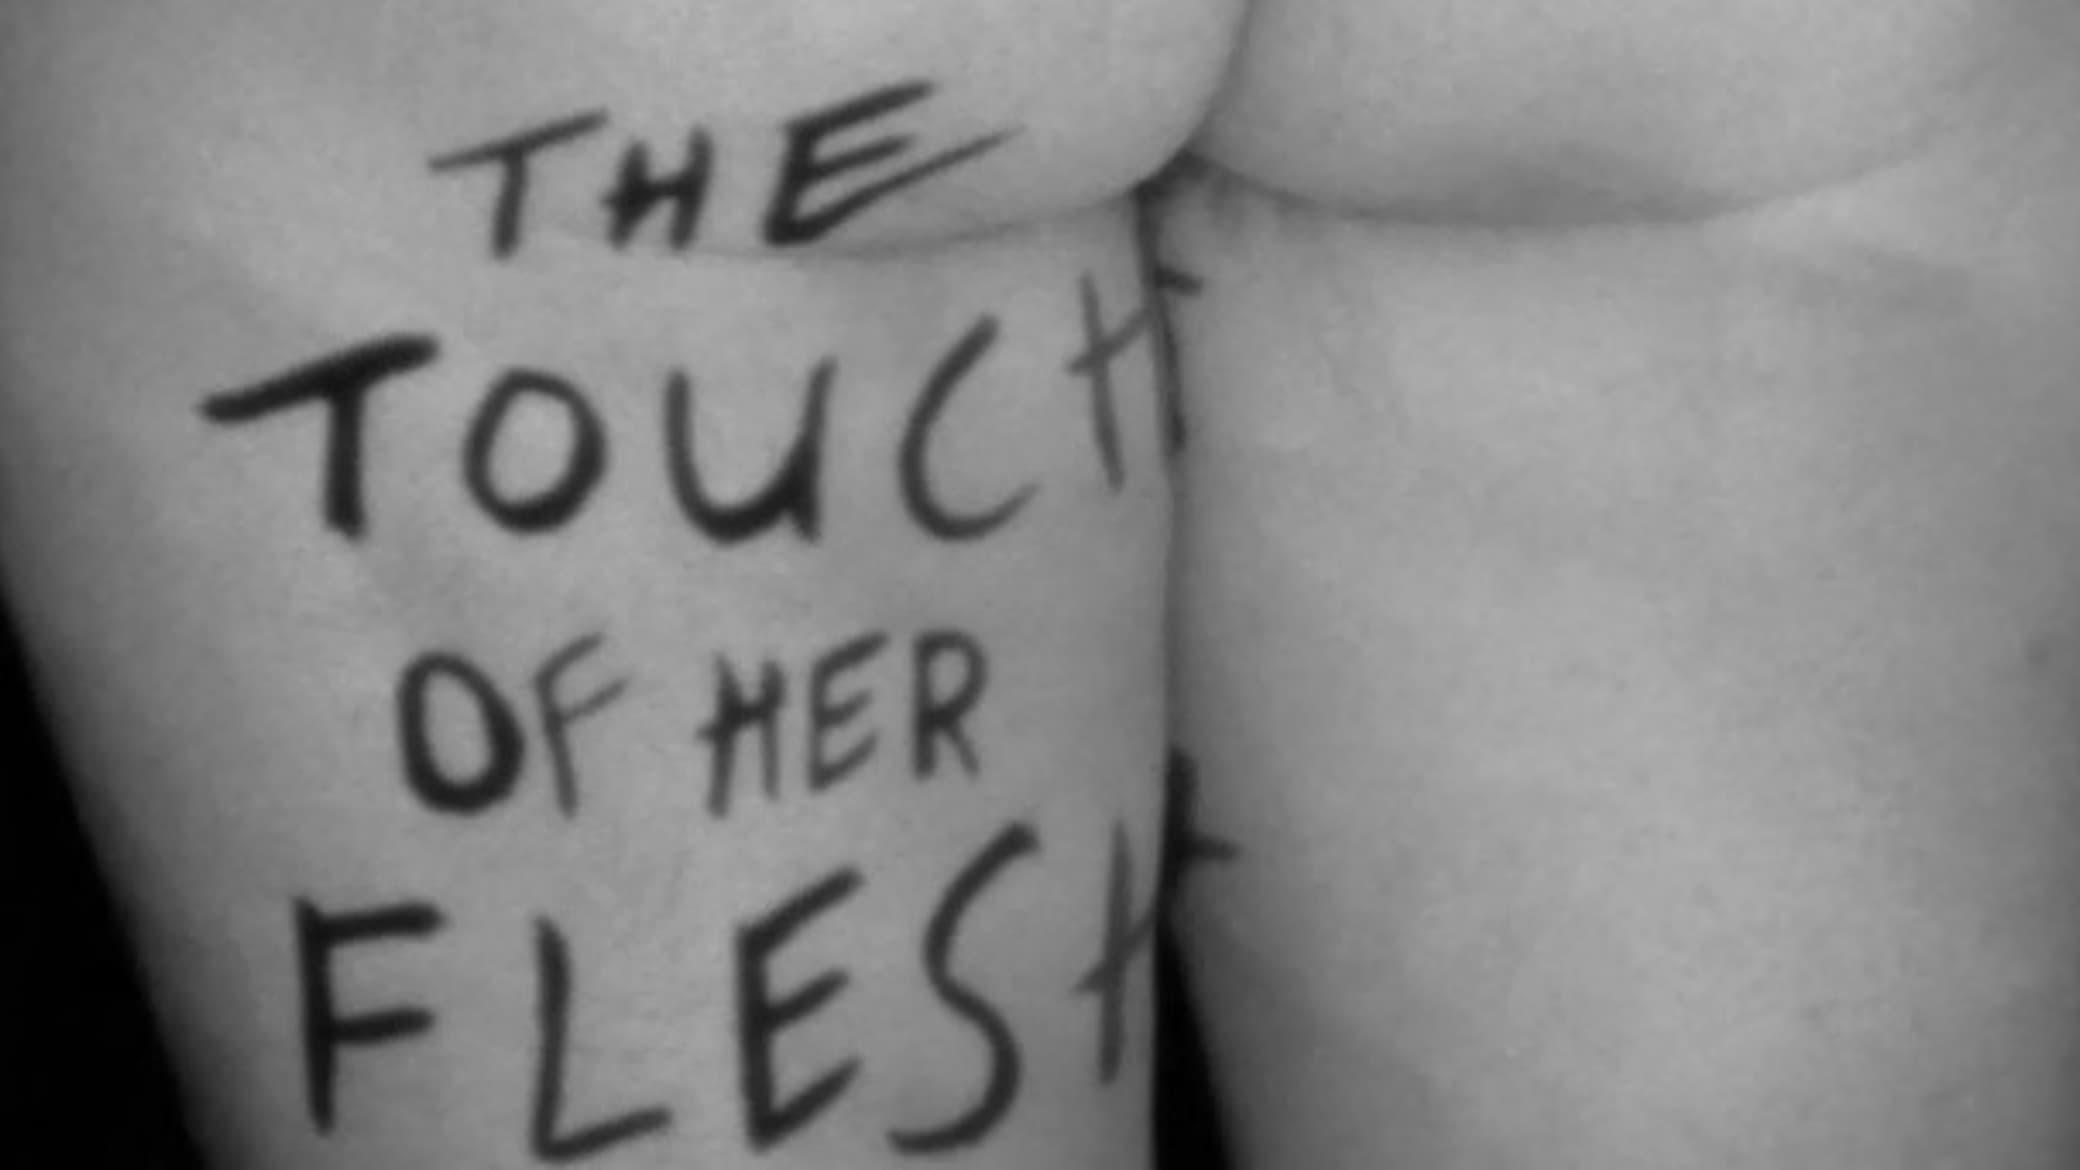 The Touch of Her Flesh backdrop